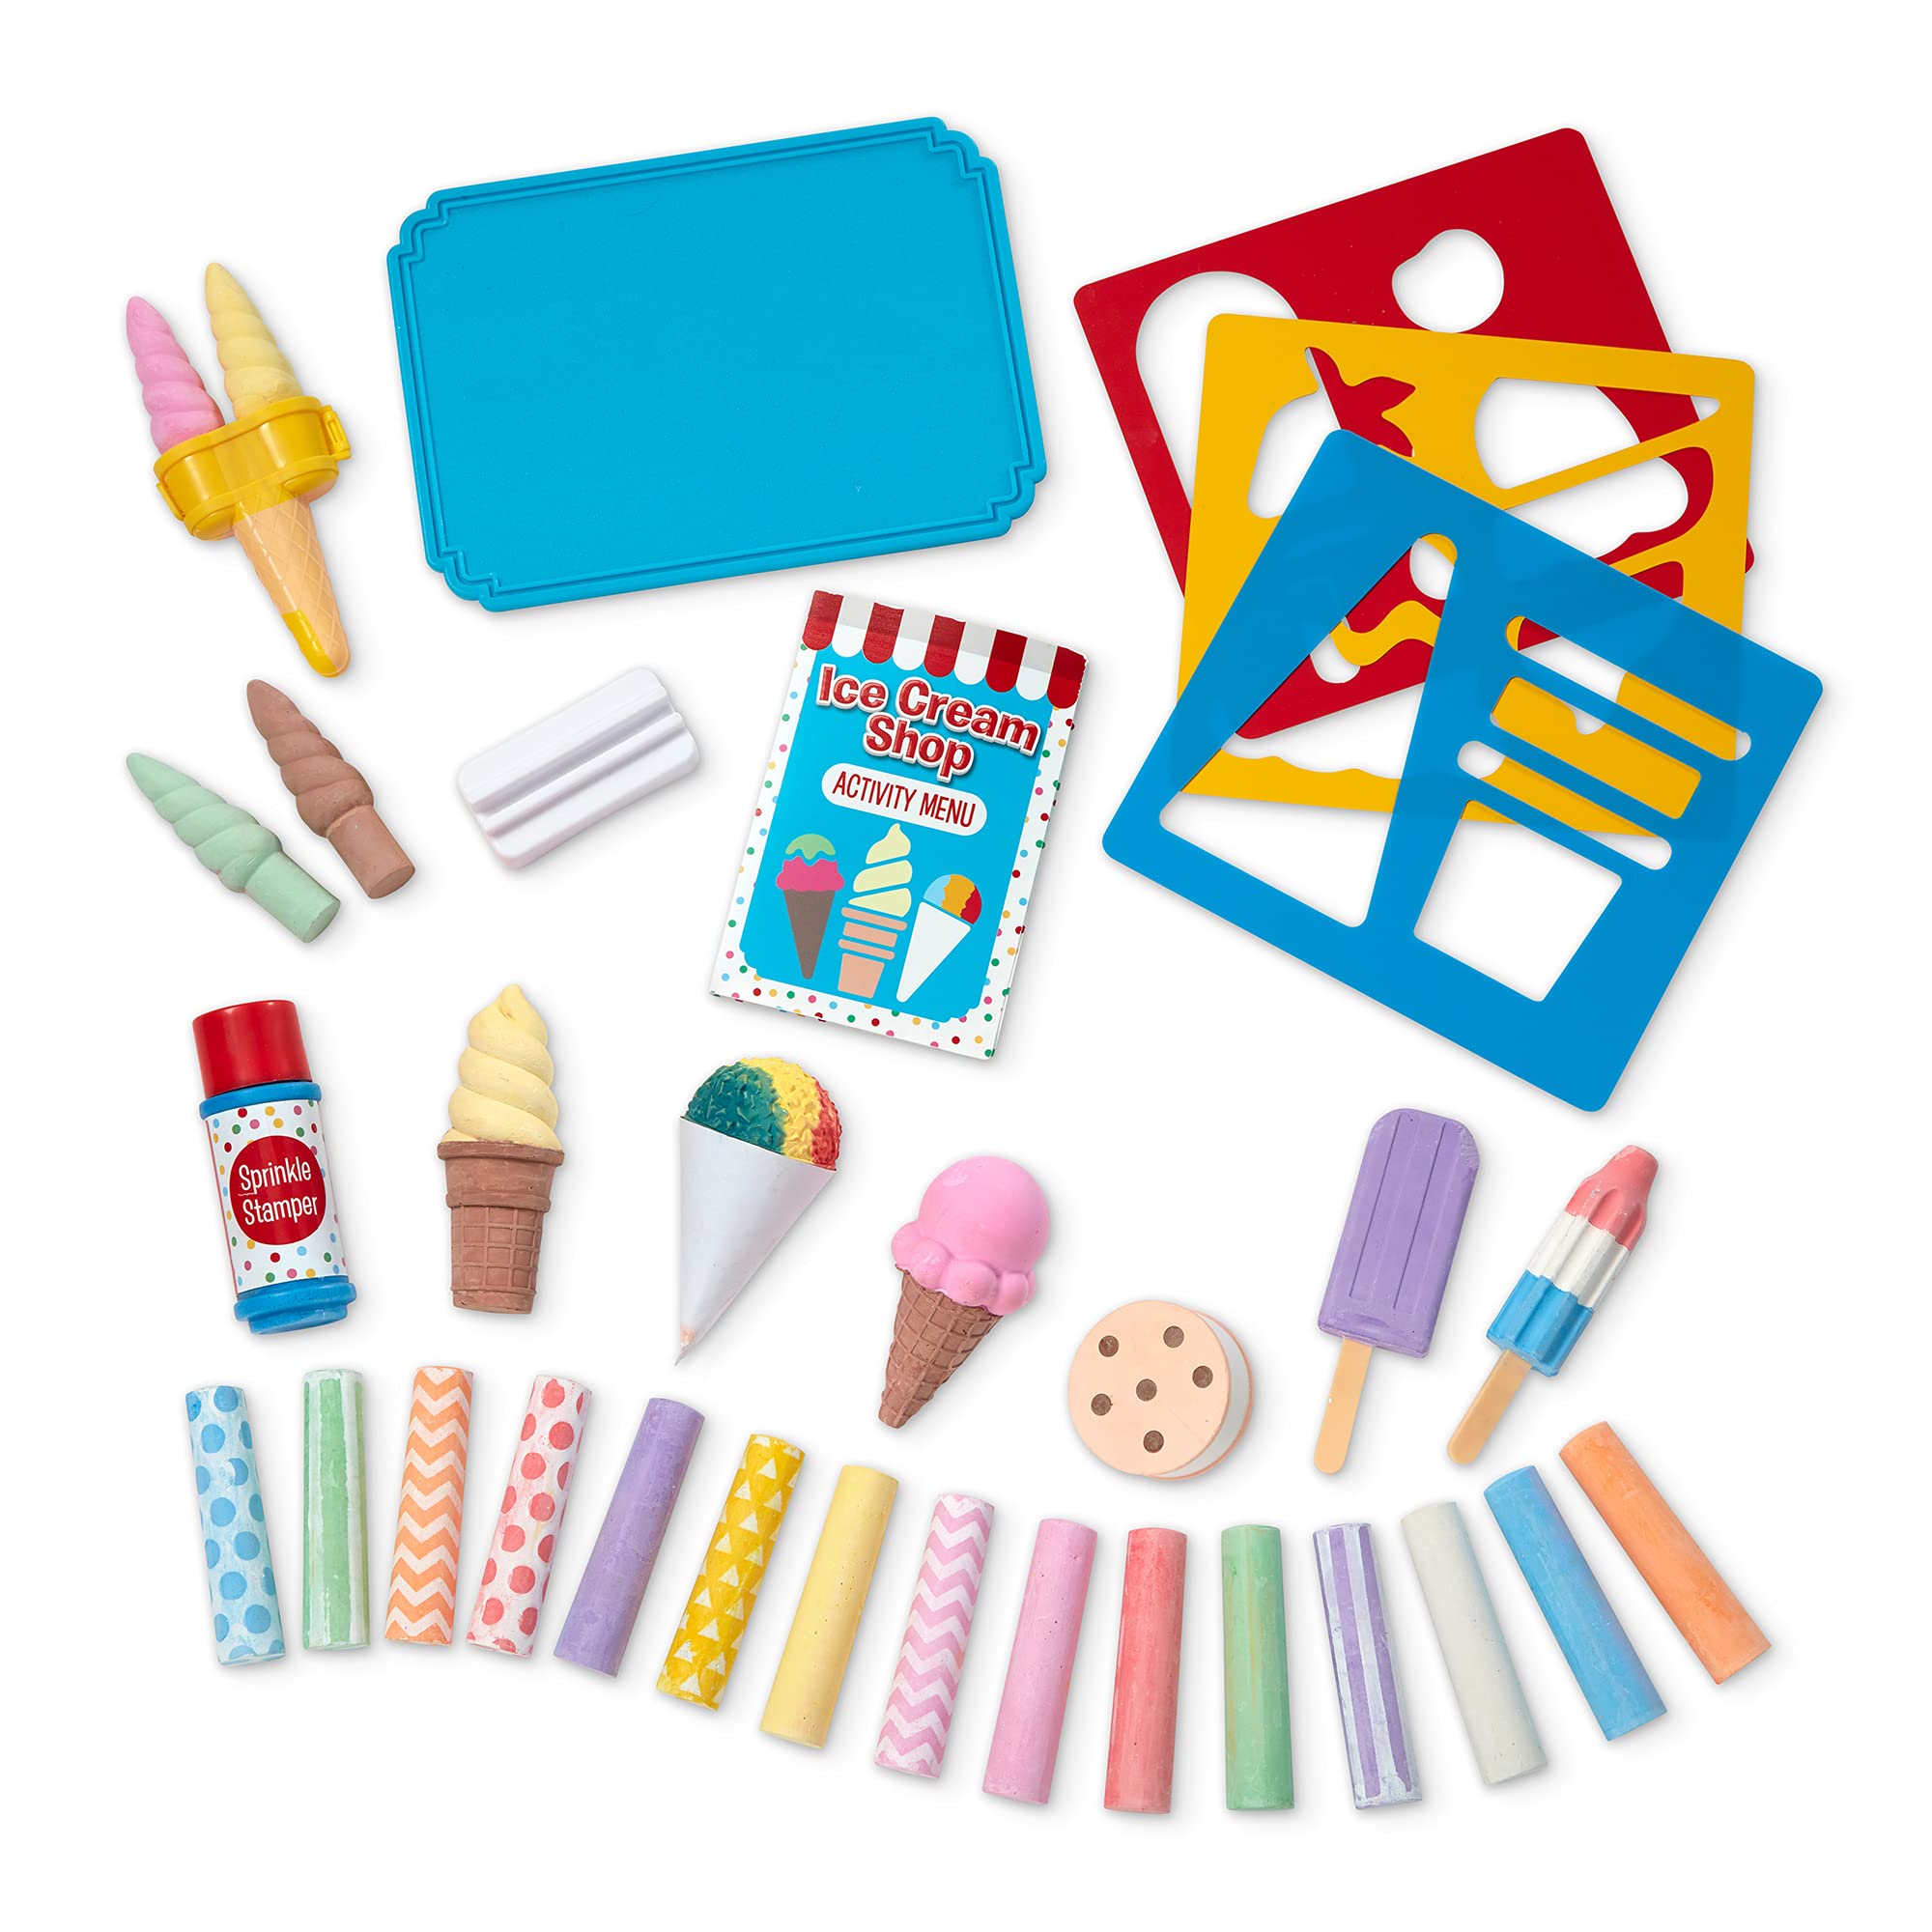 33-Piece Melissa & Doug Ice Cream Shop Multi-Colored Chalk Playset $9.83 + Free Shipping w/ Prime or on $35+